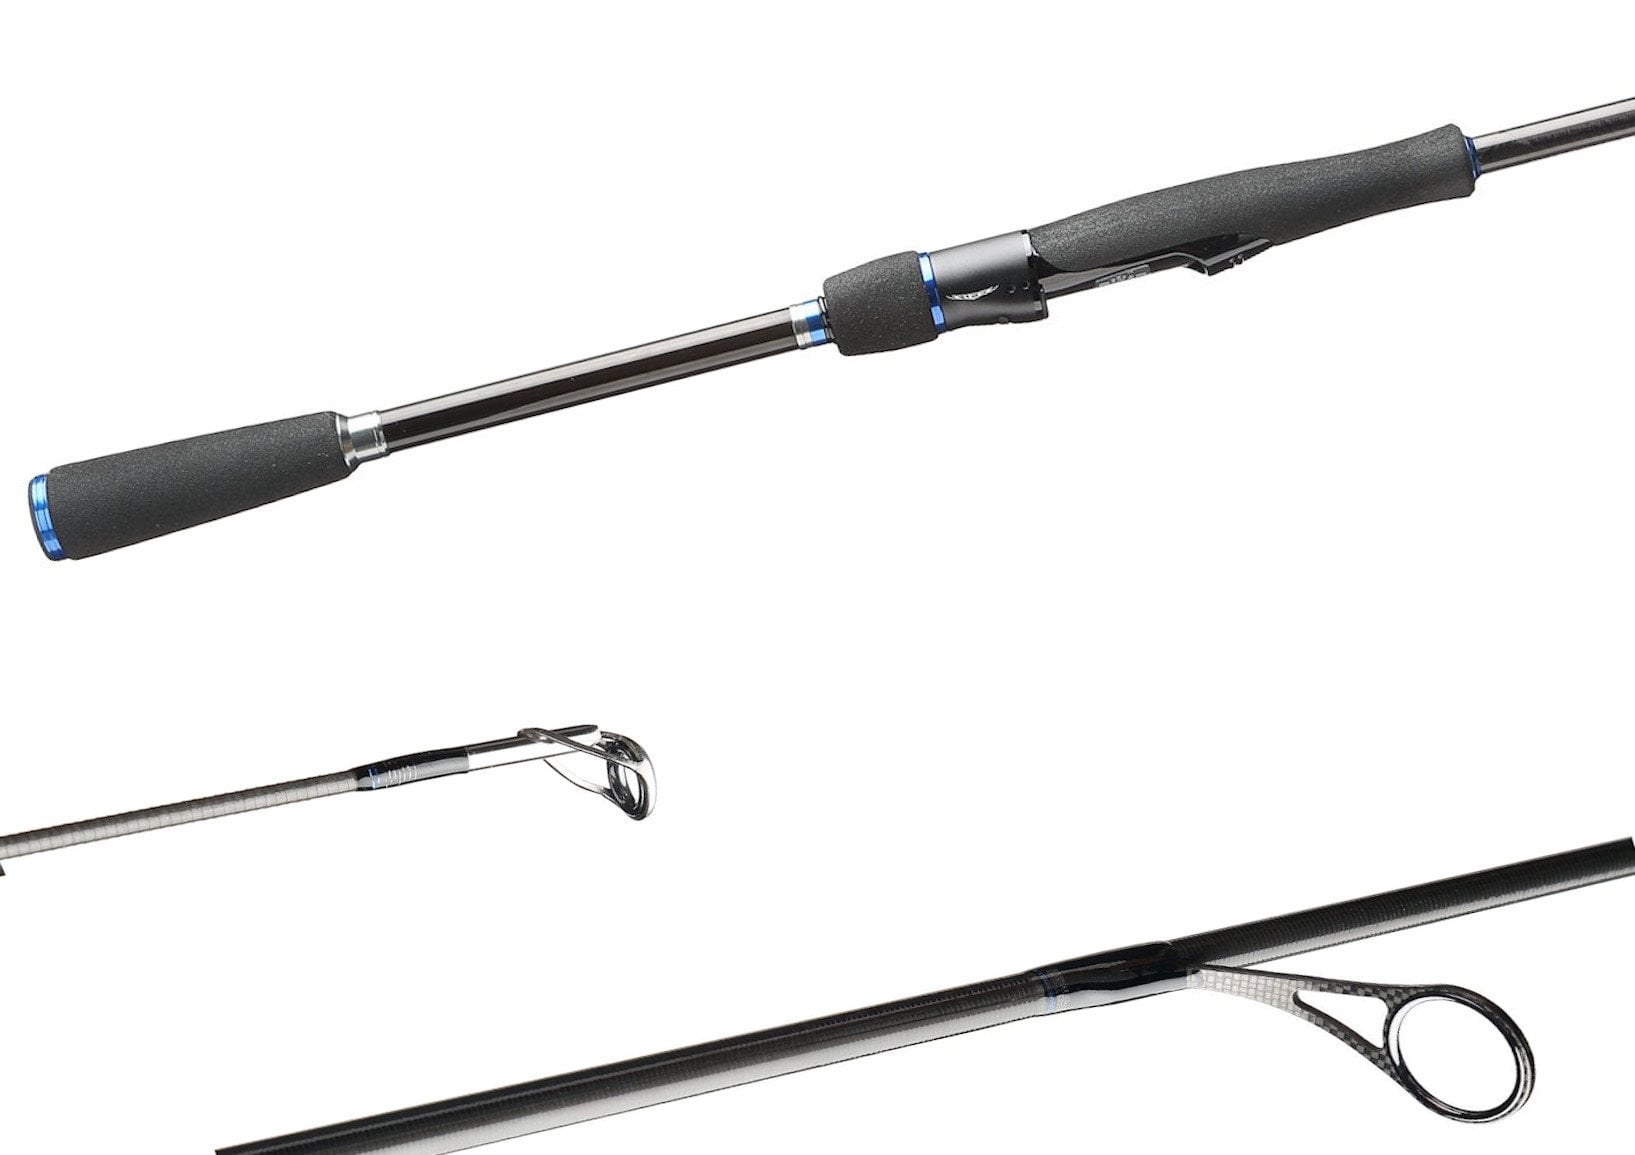 Daiwa Steez AGS 7' Heavy Fast Action Spinning Fishing Rod - STZ701HFSA-AGS  